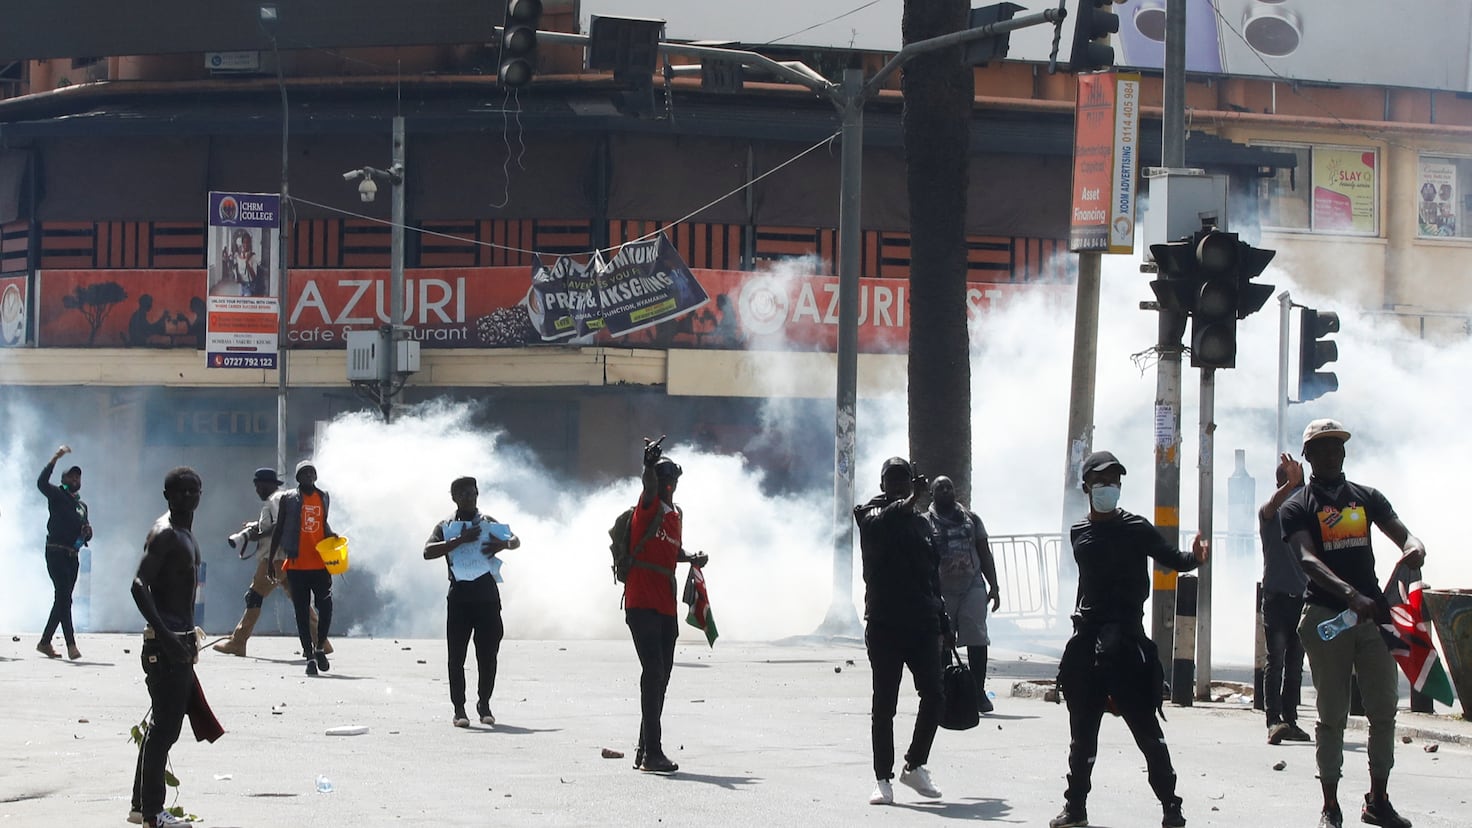 Chaos in Kenya: the reason for the deadly protests in Nairobi